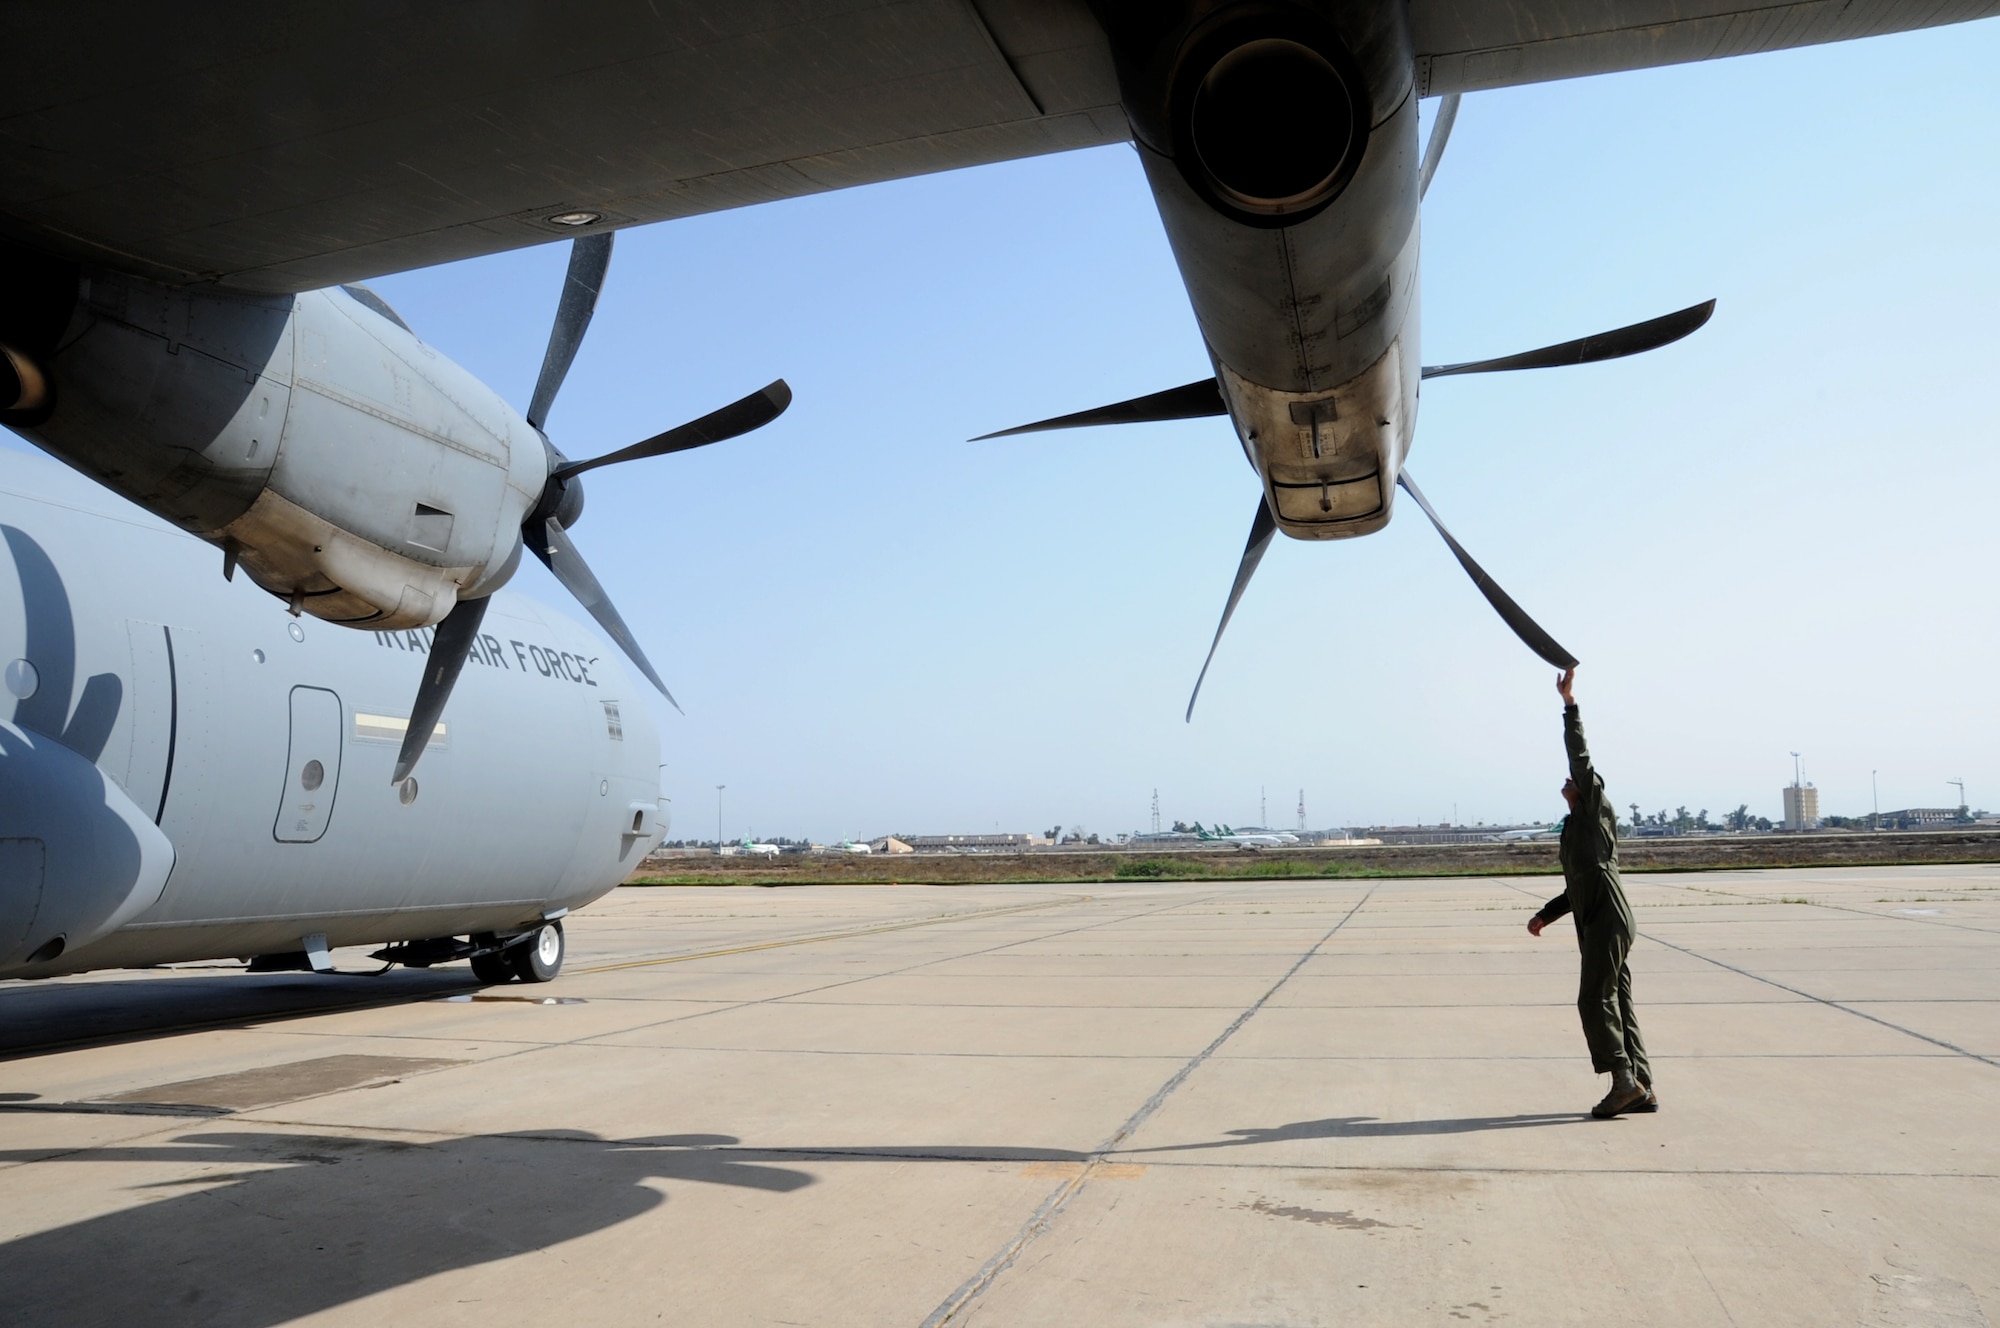 Iraqi Air Force Maj. Diya Majid, pilot, inspects a C-130J Super Hercules propeller March 20, 2017 at Martyr Muhammad Alaa Air Base, Iraq. The aircraft is used by the Iraqi Air Force to move cargo and personnel downrange in the fight against ISIS. (U.S. Air Force photo/Tech. Sgt. Kenneth McCann)